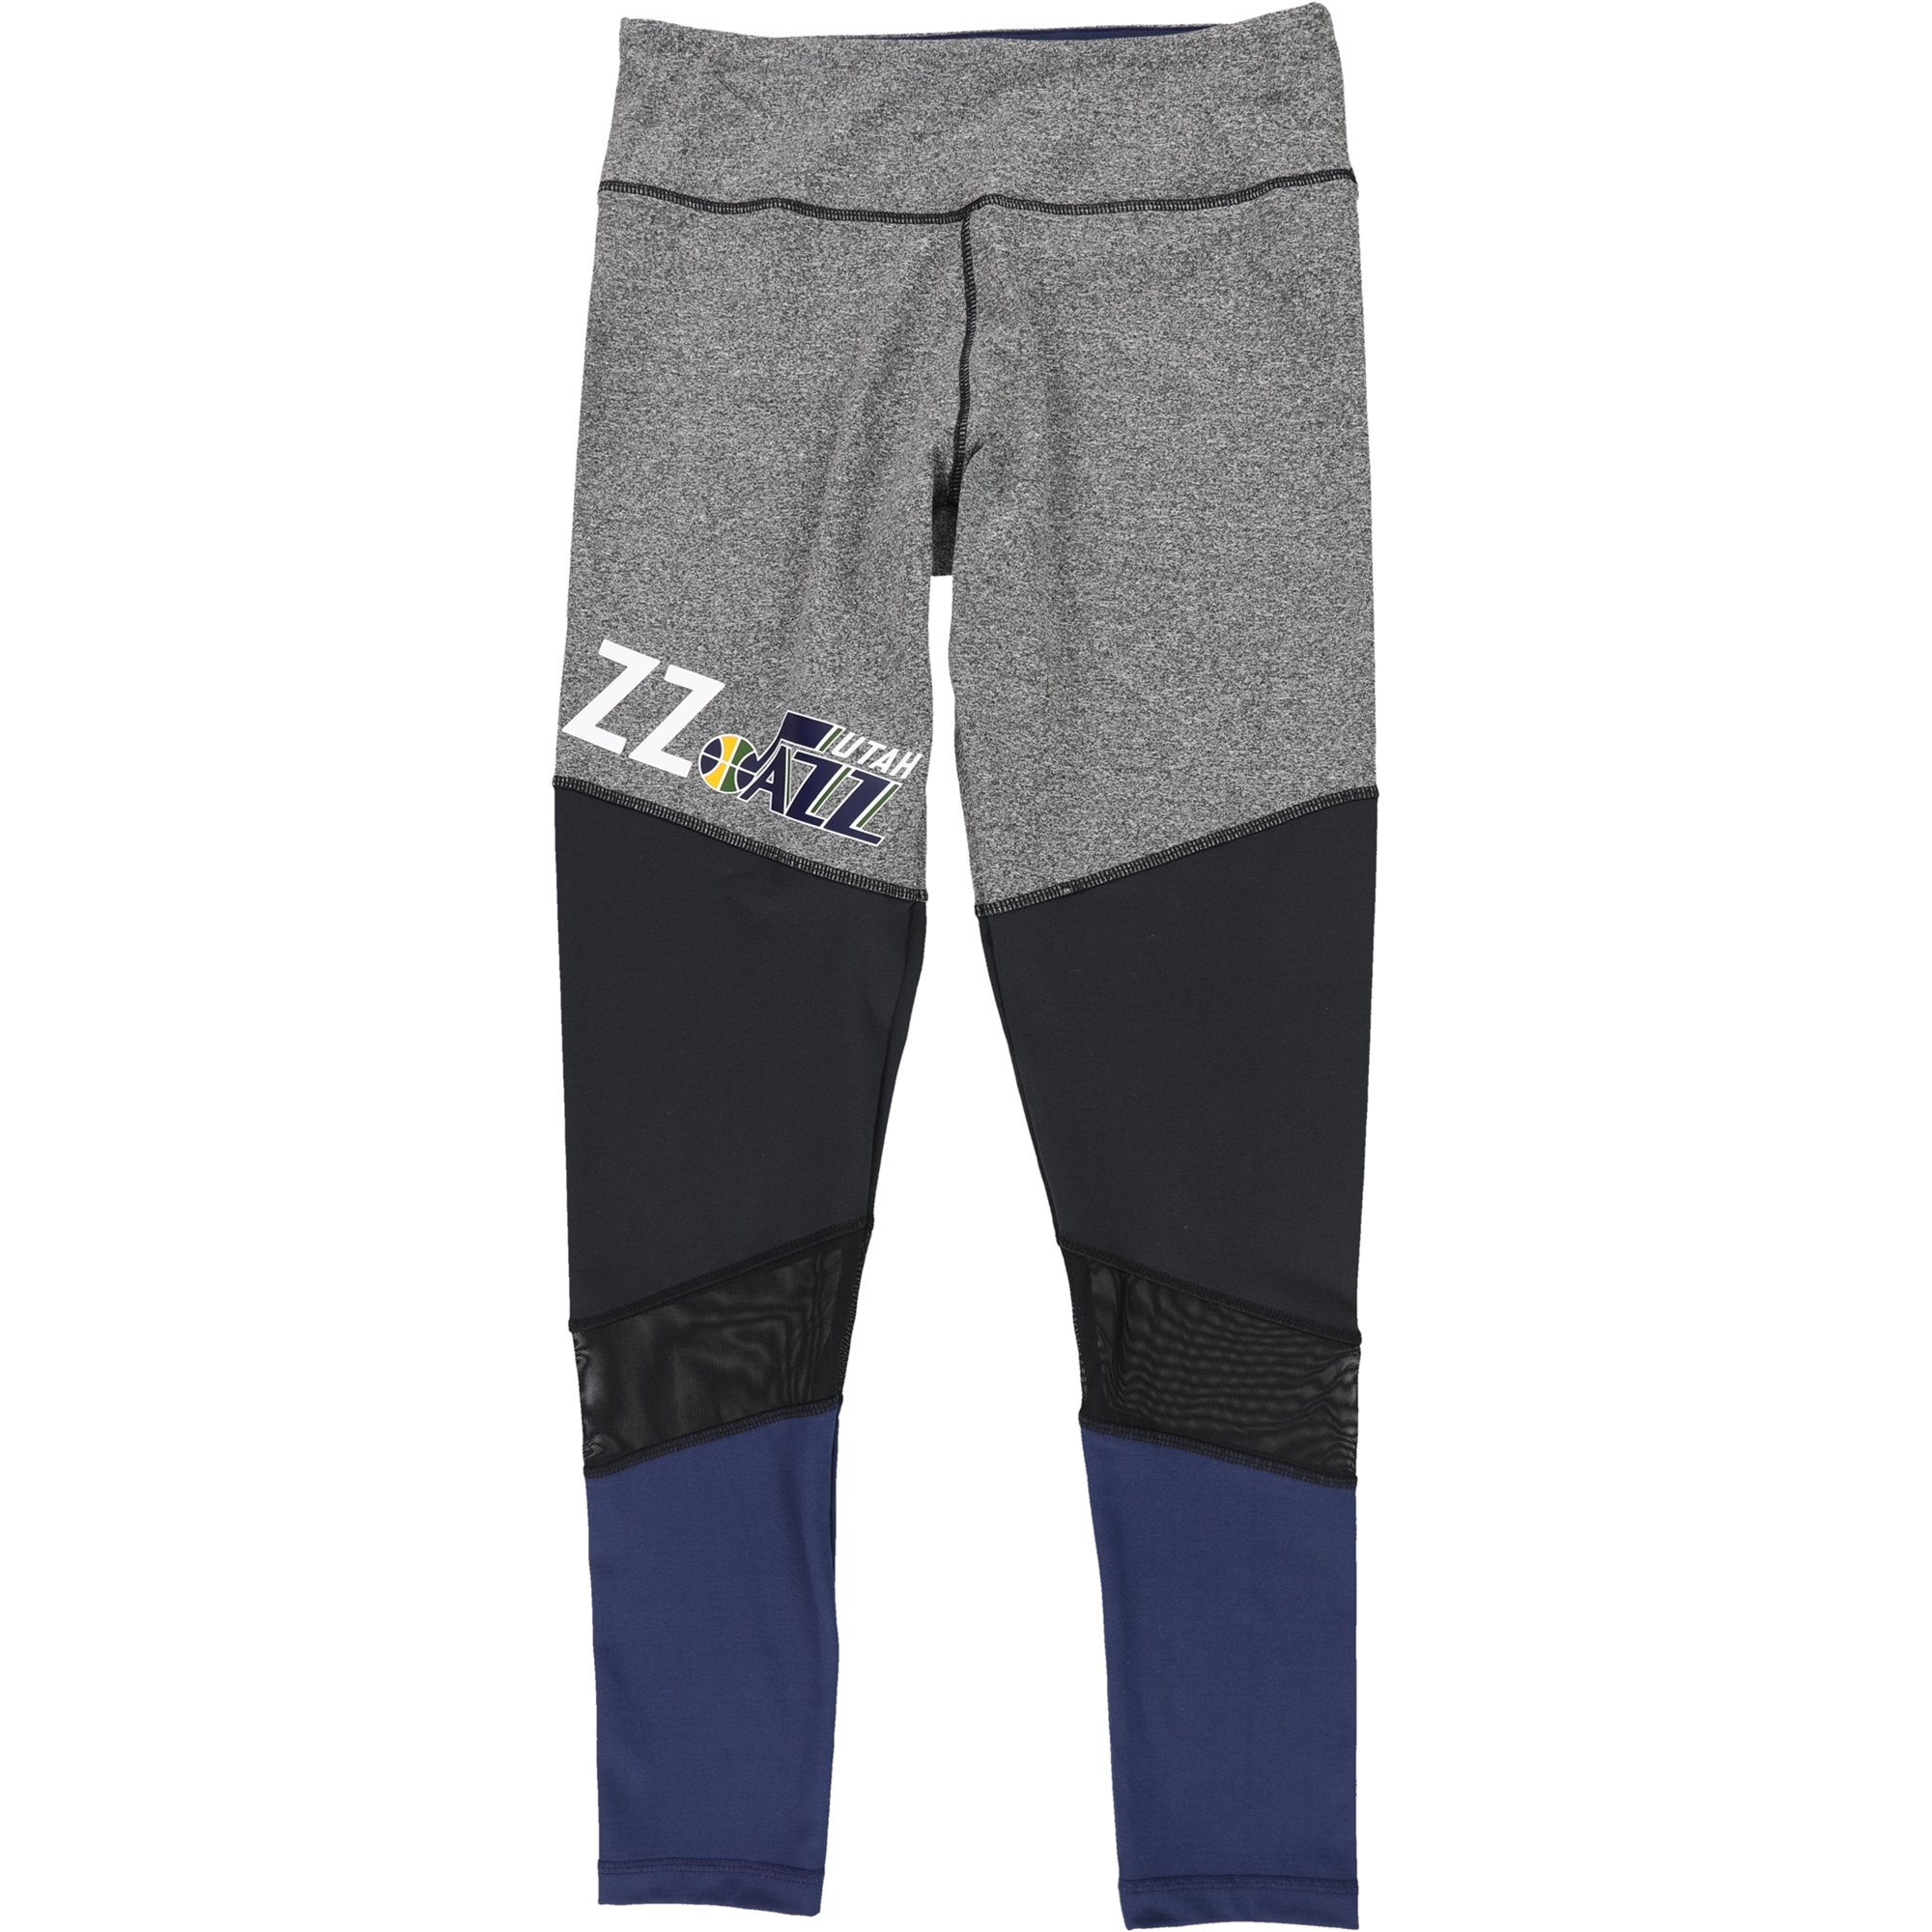 Buy a G-Iii Sports Womens Utah Jazz Compression Athletic Pants